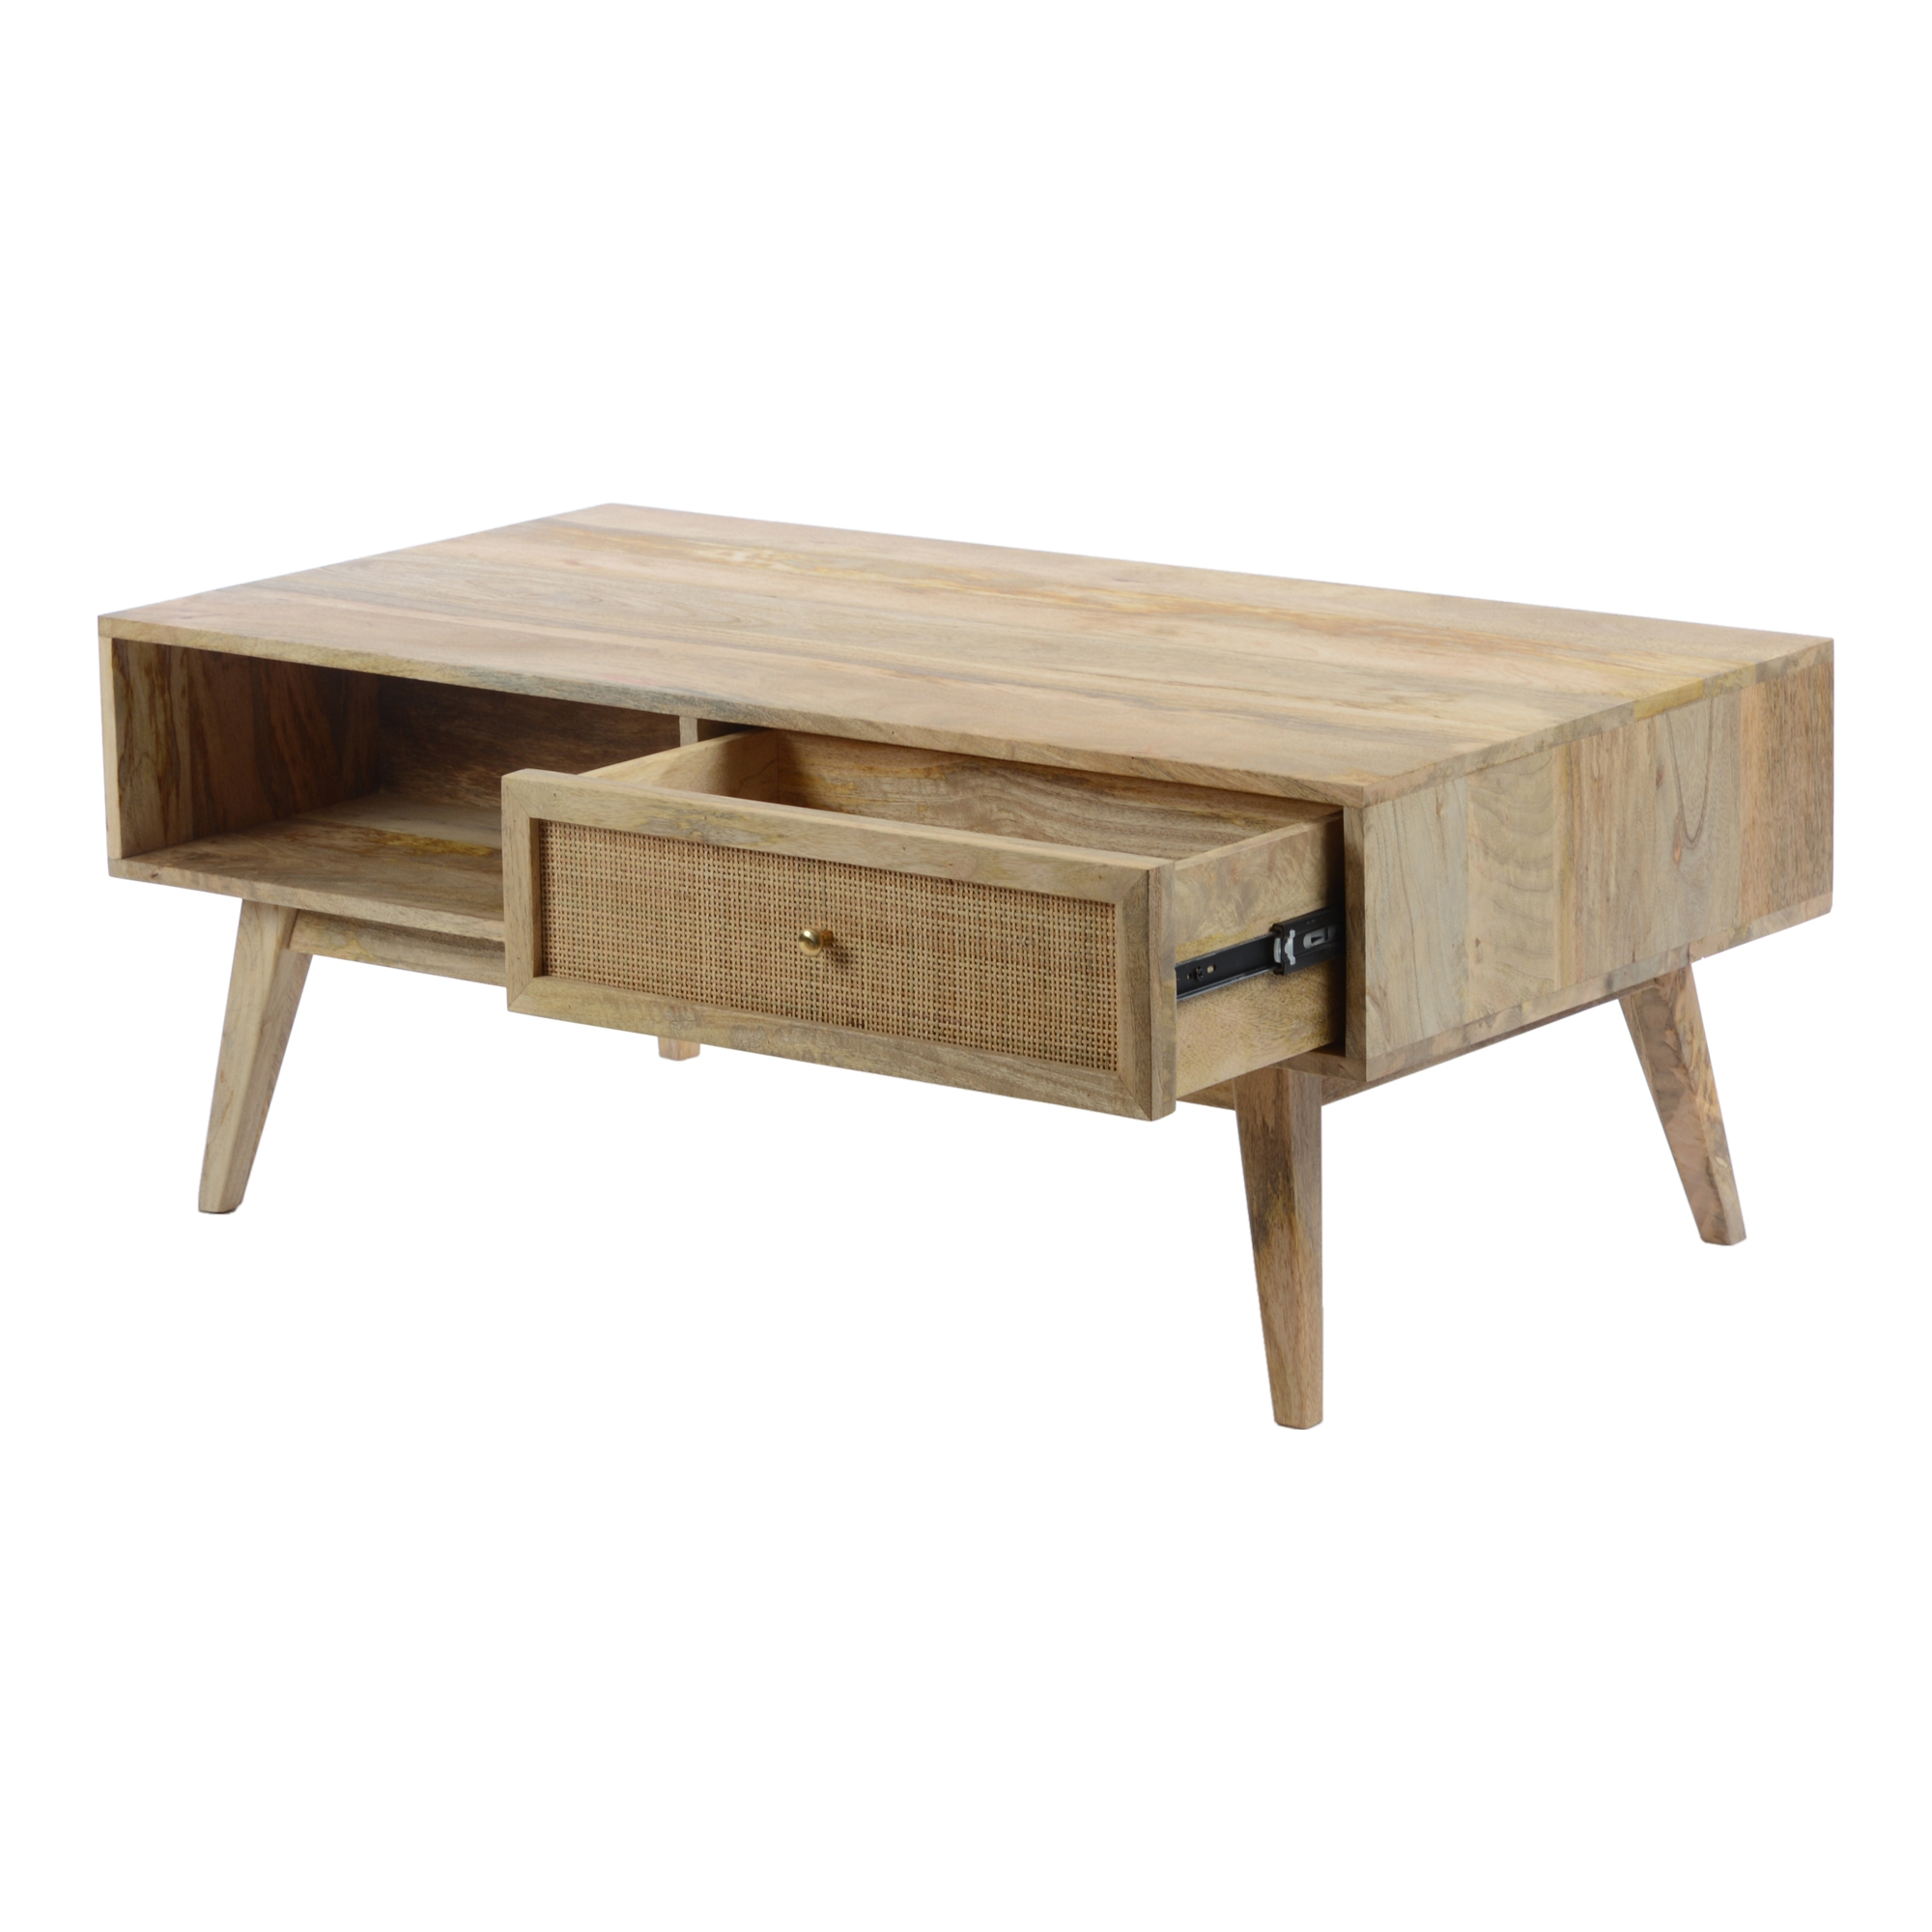 REED COFFEE TABLE - Image 2